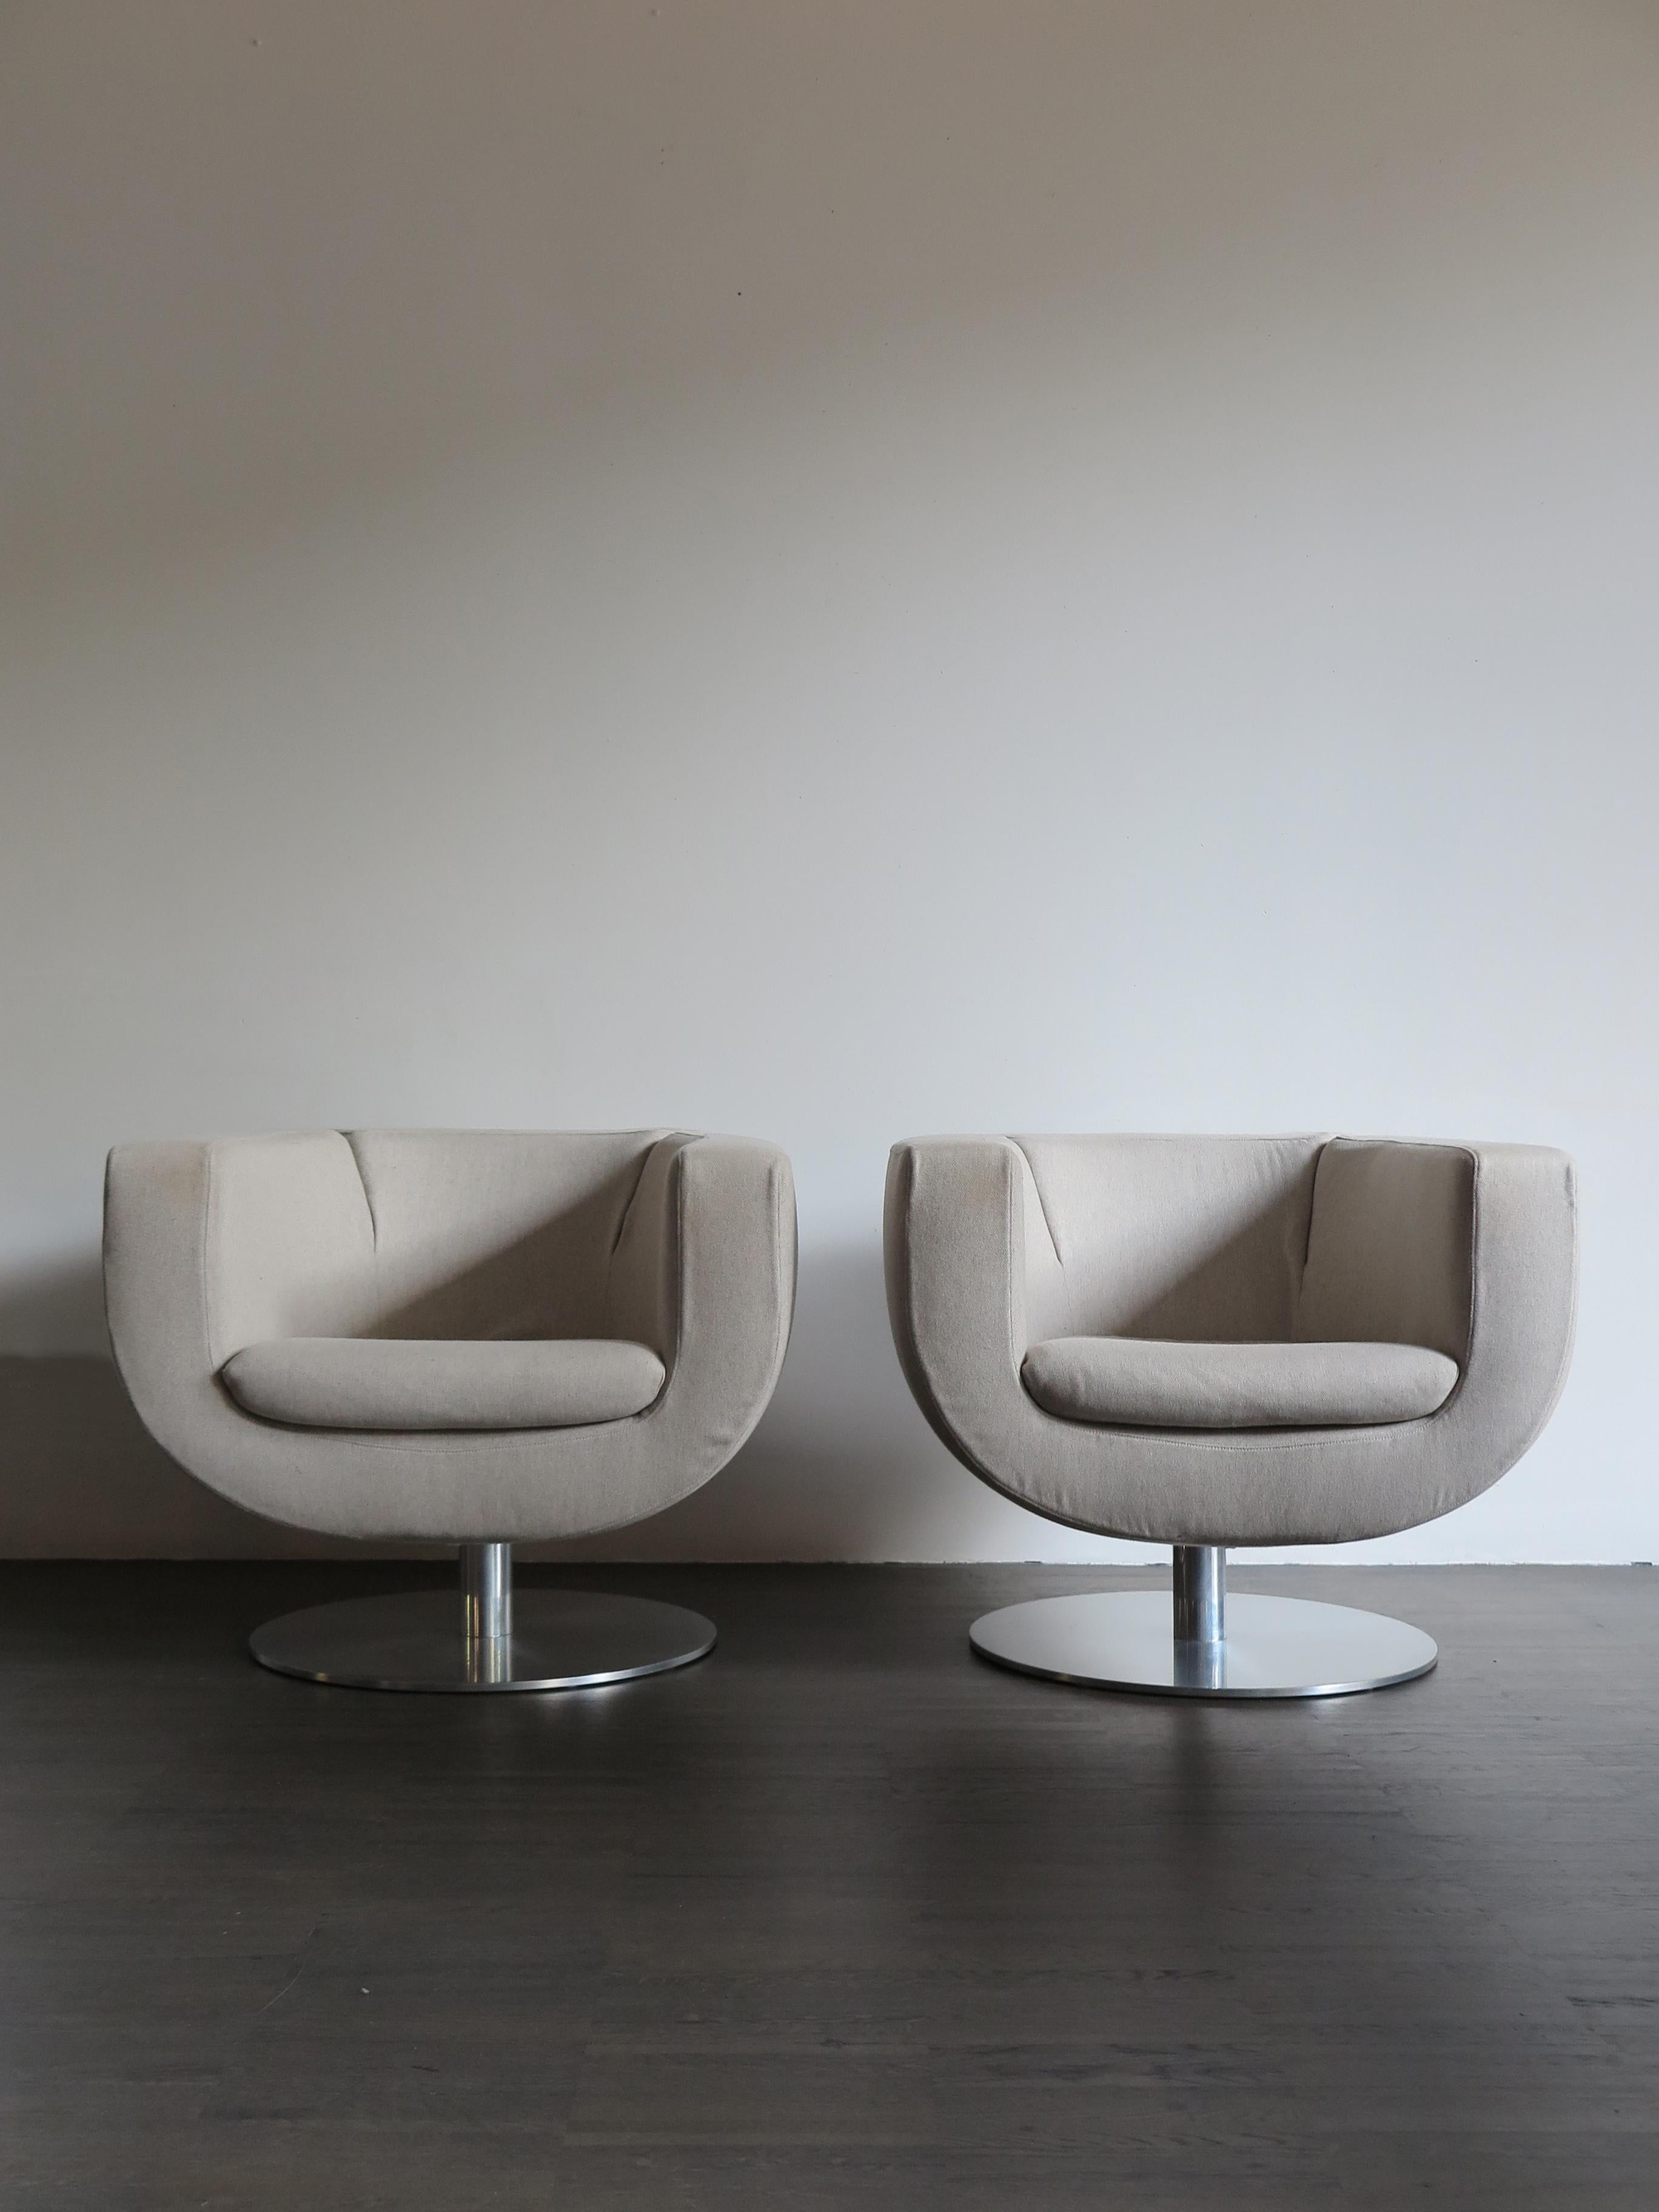 Couple of Italian armchairs model Tulip designed by Jeffrey Bernett for B&B Italia in 2000.
Tulip is a 360-degree swivel armchair with remarkably flexible use, whose highlight is the well-balanced proportion between its thickness and the